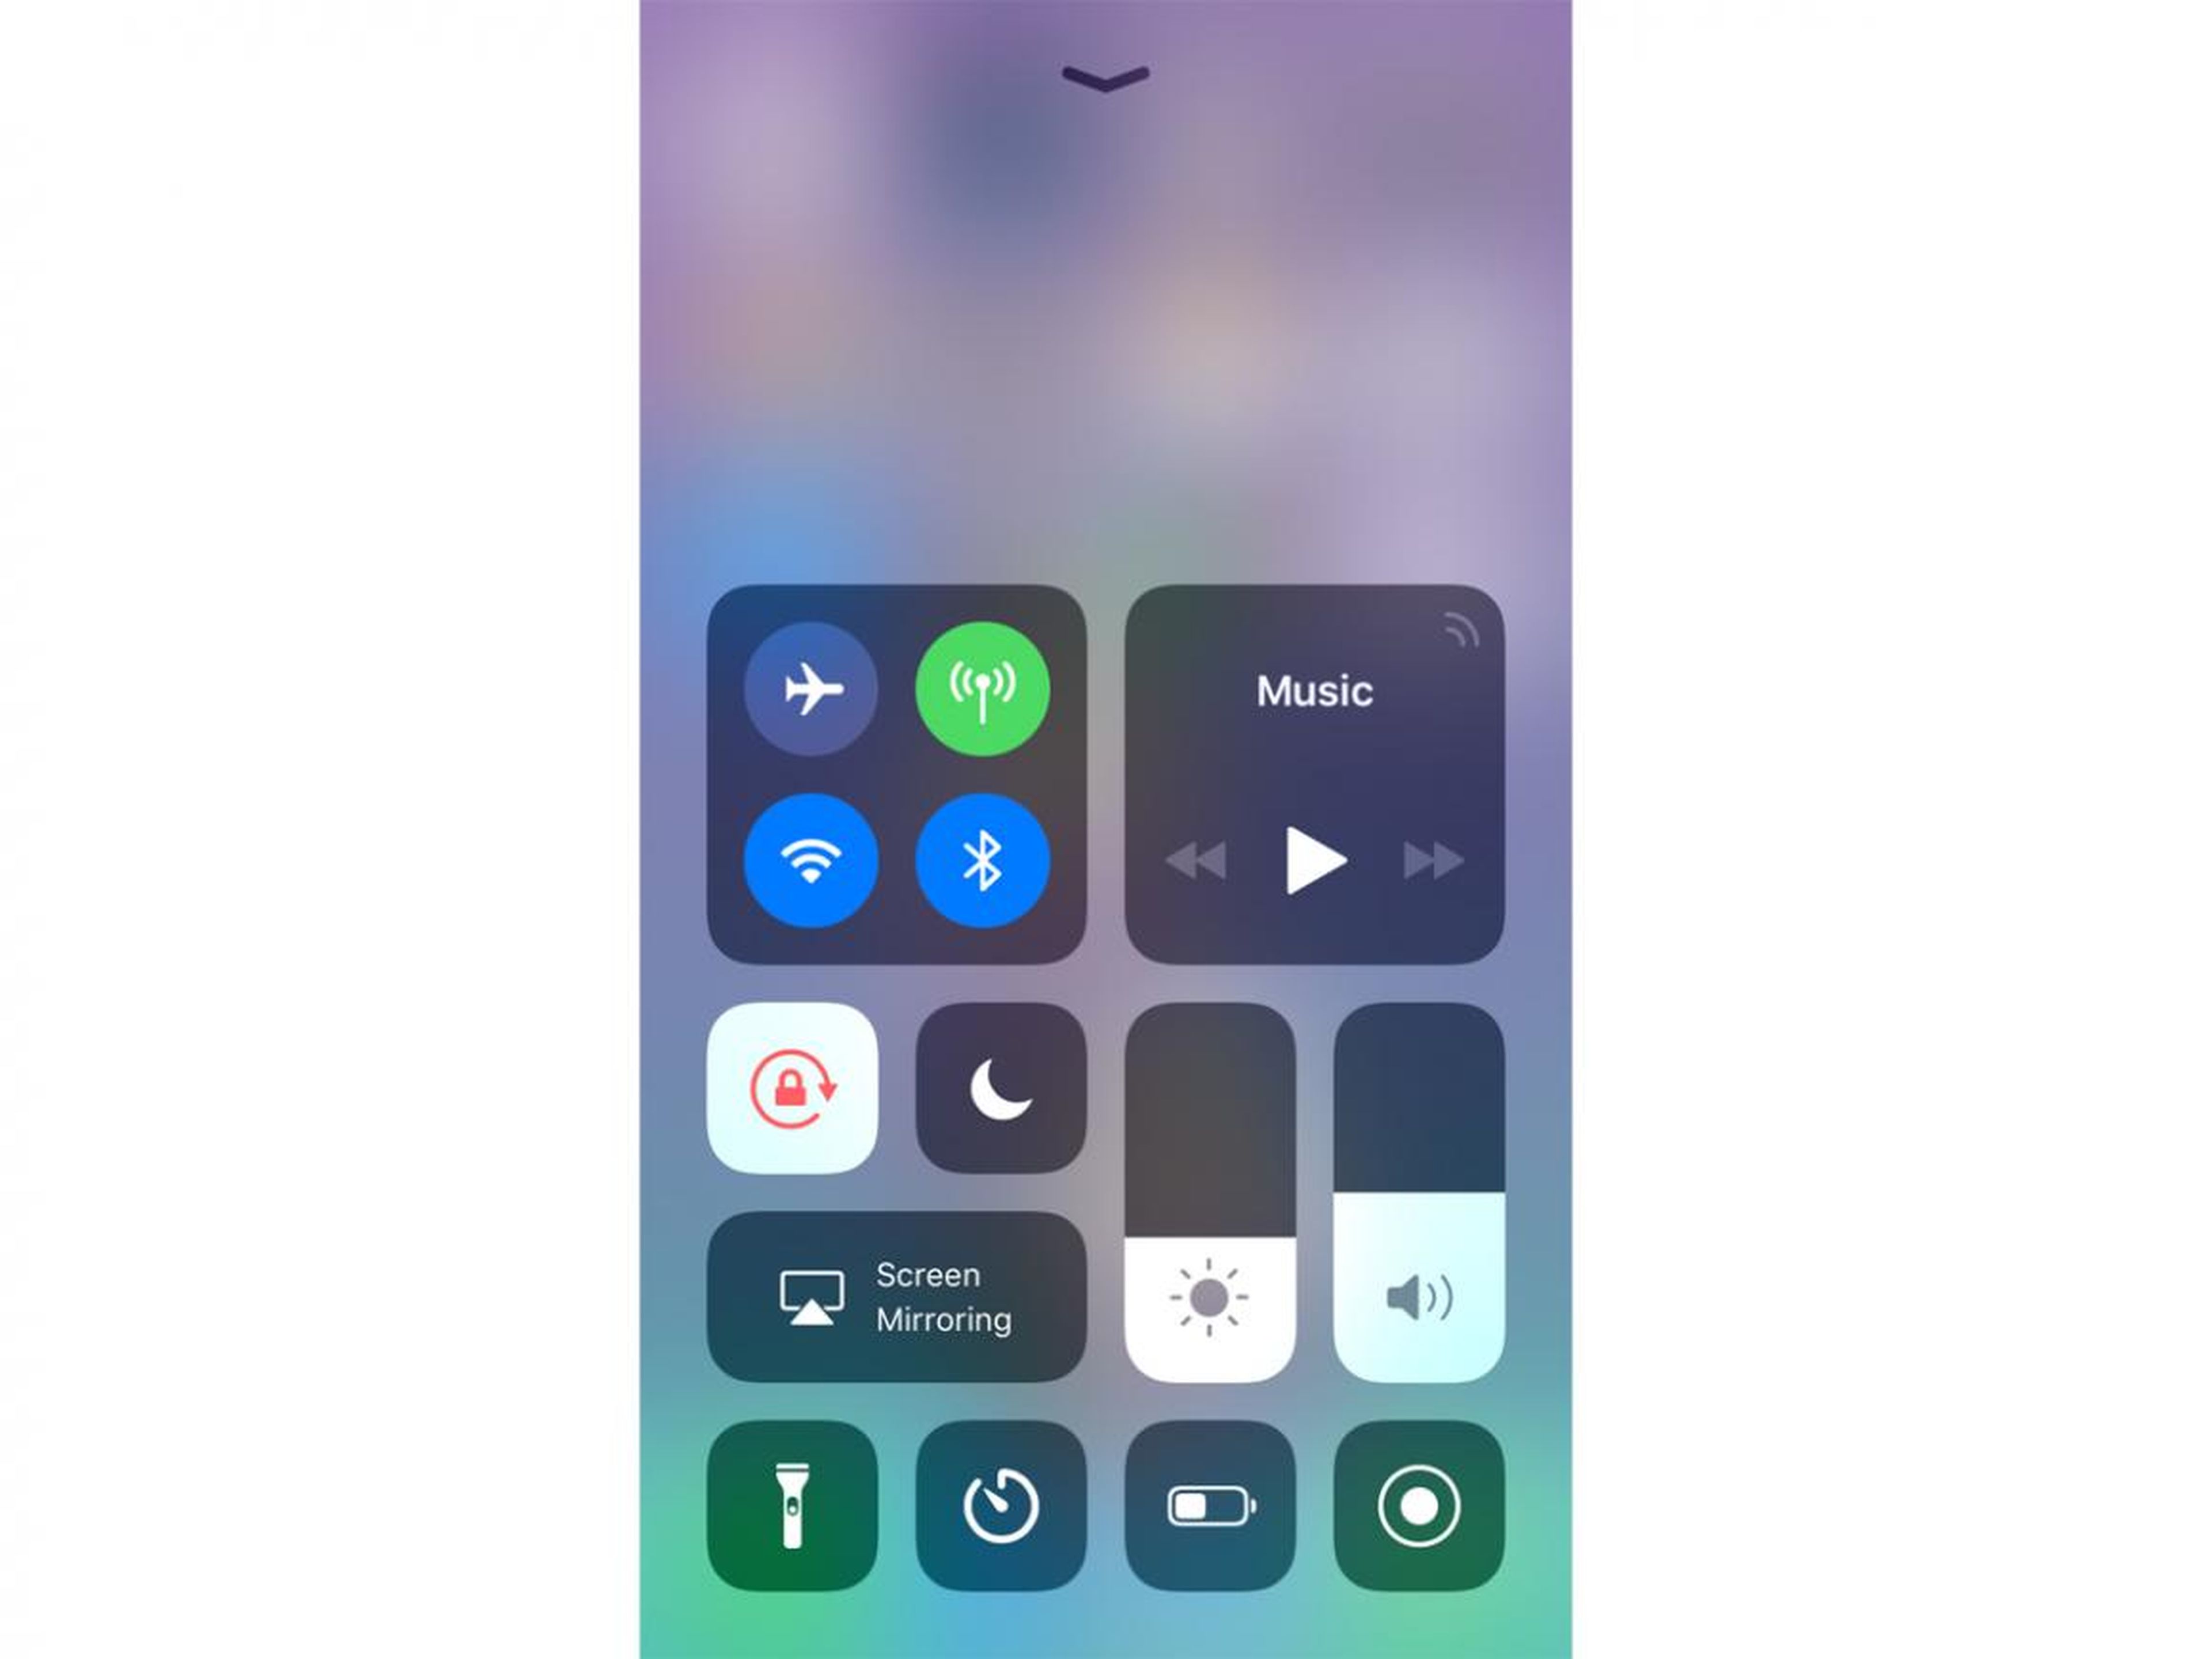 The ability to choose WiFi networks and Bluetooth devices from the Control Center